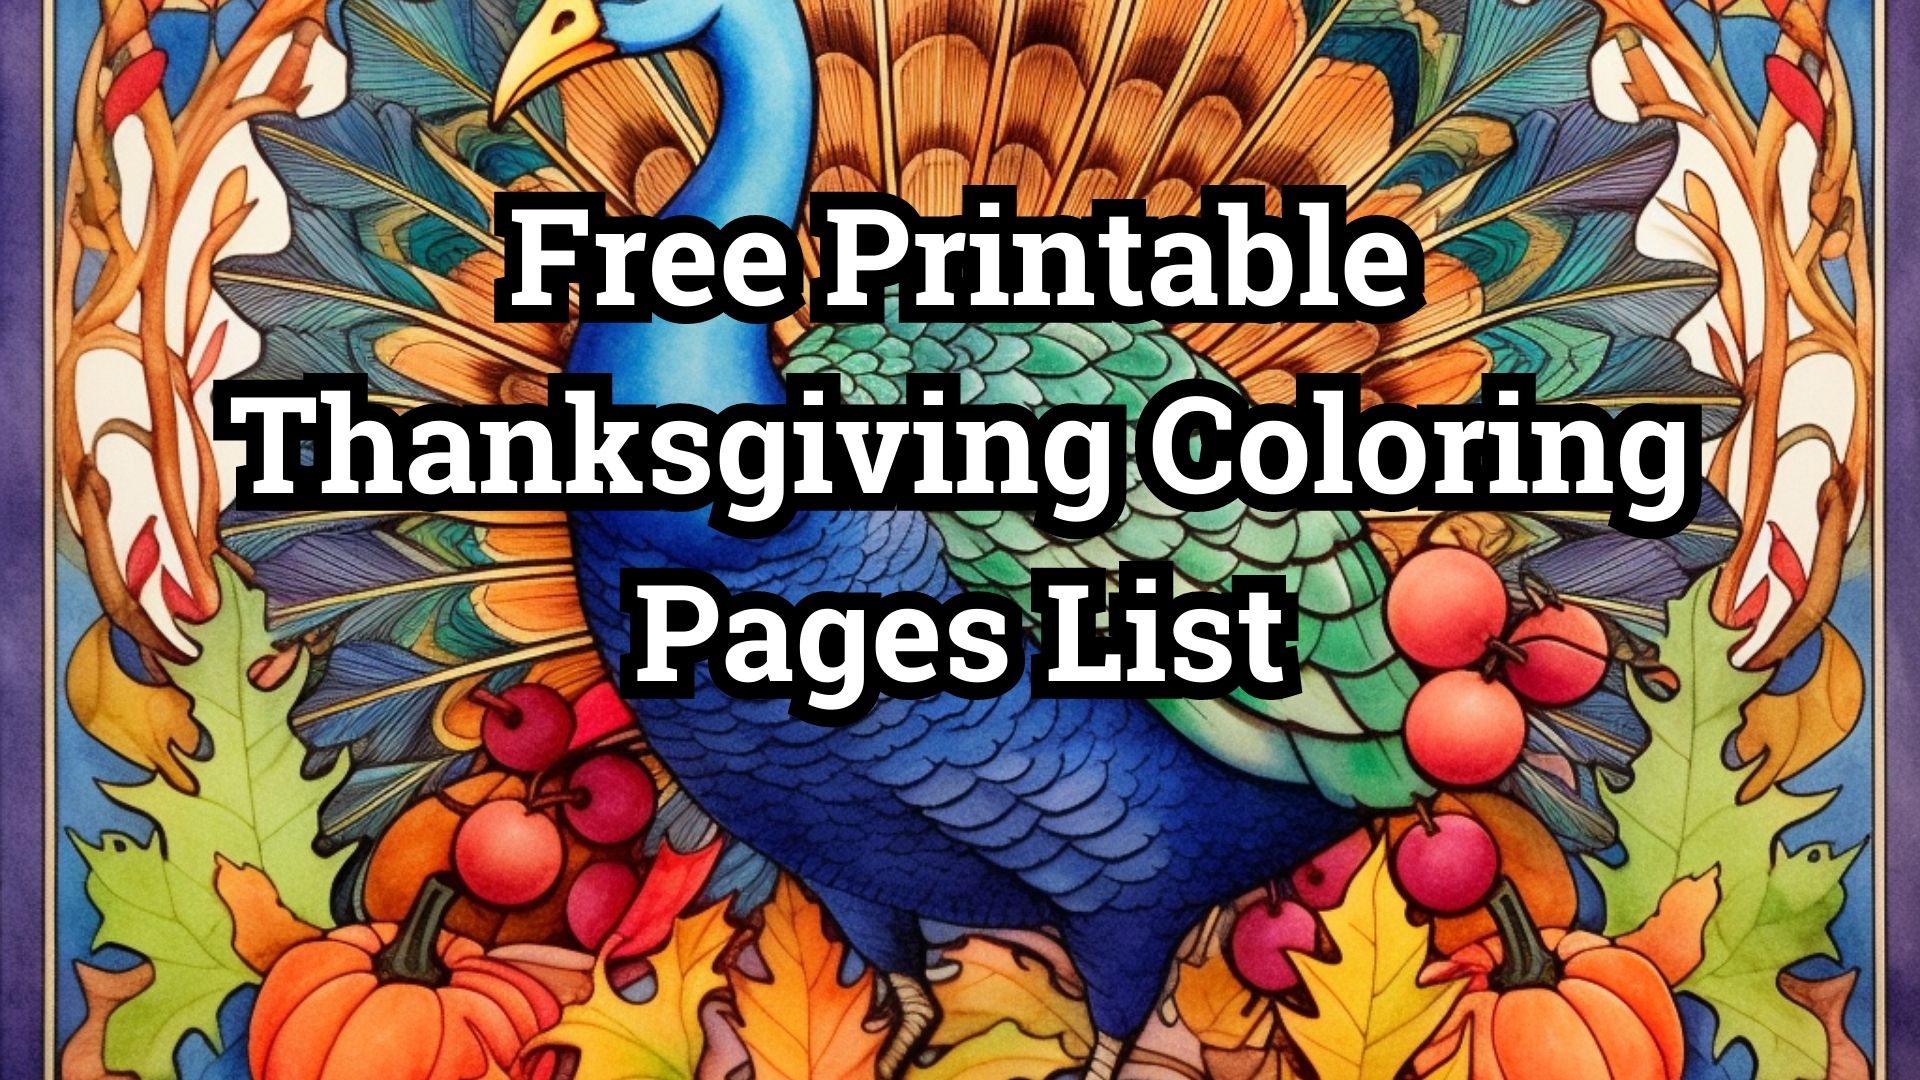 Free Printable Thanksgiving Coloring Pages List